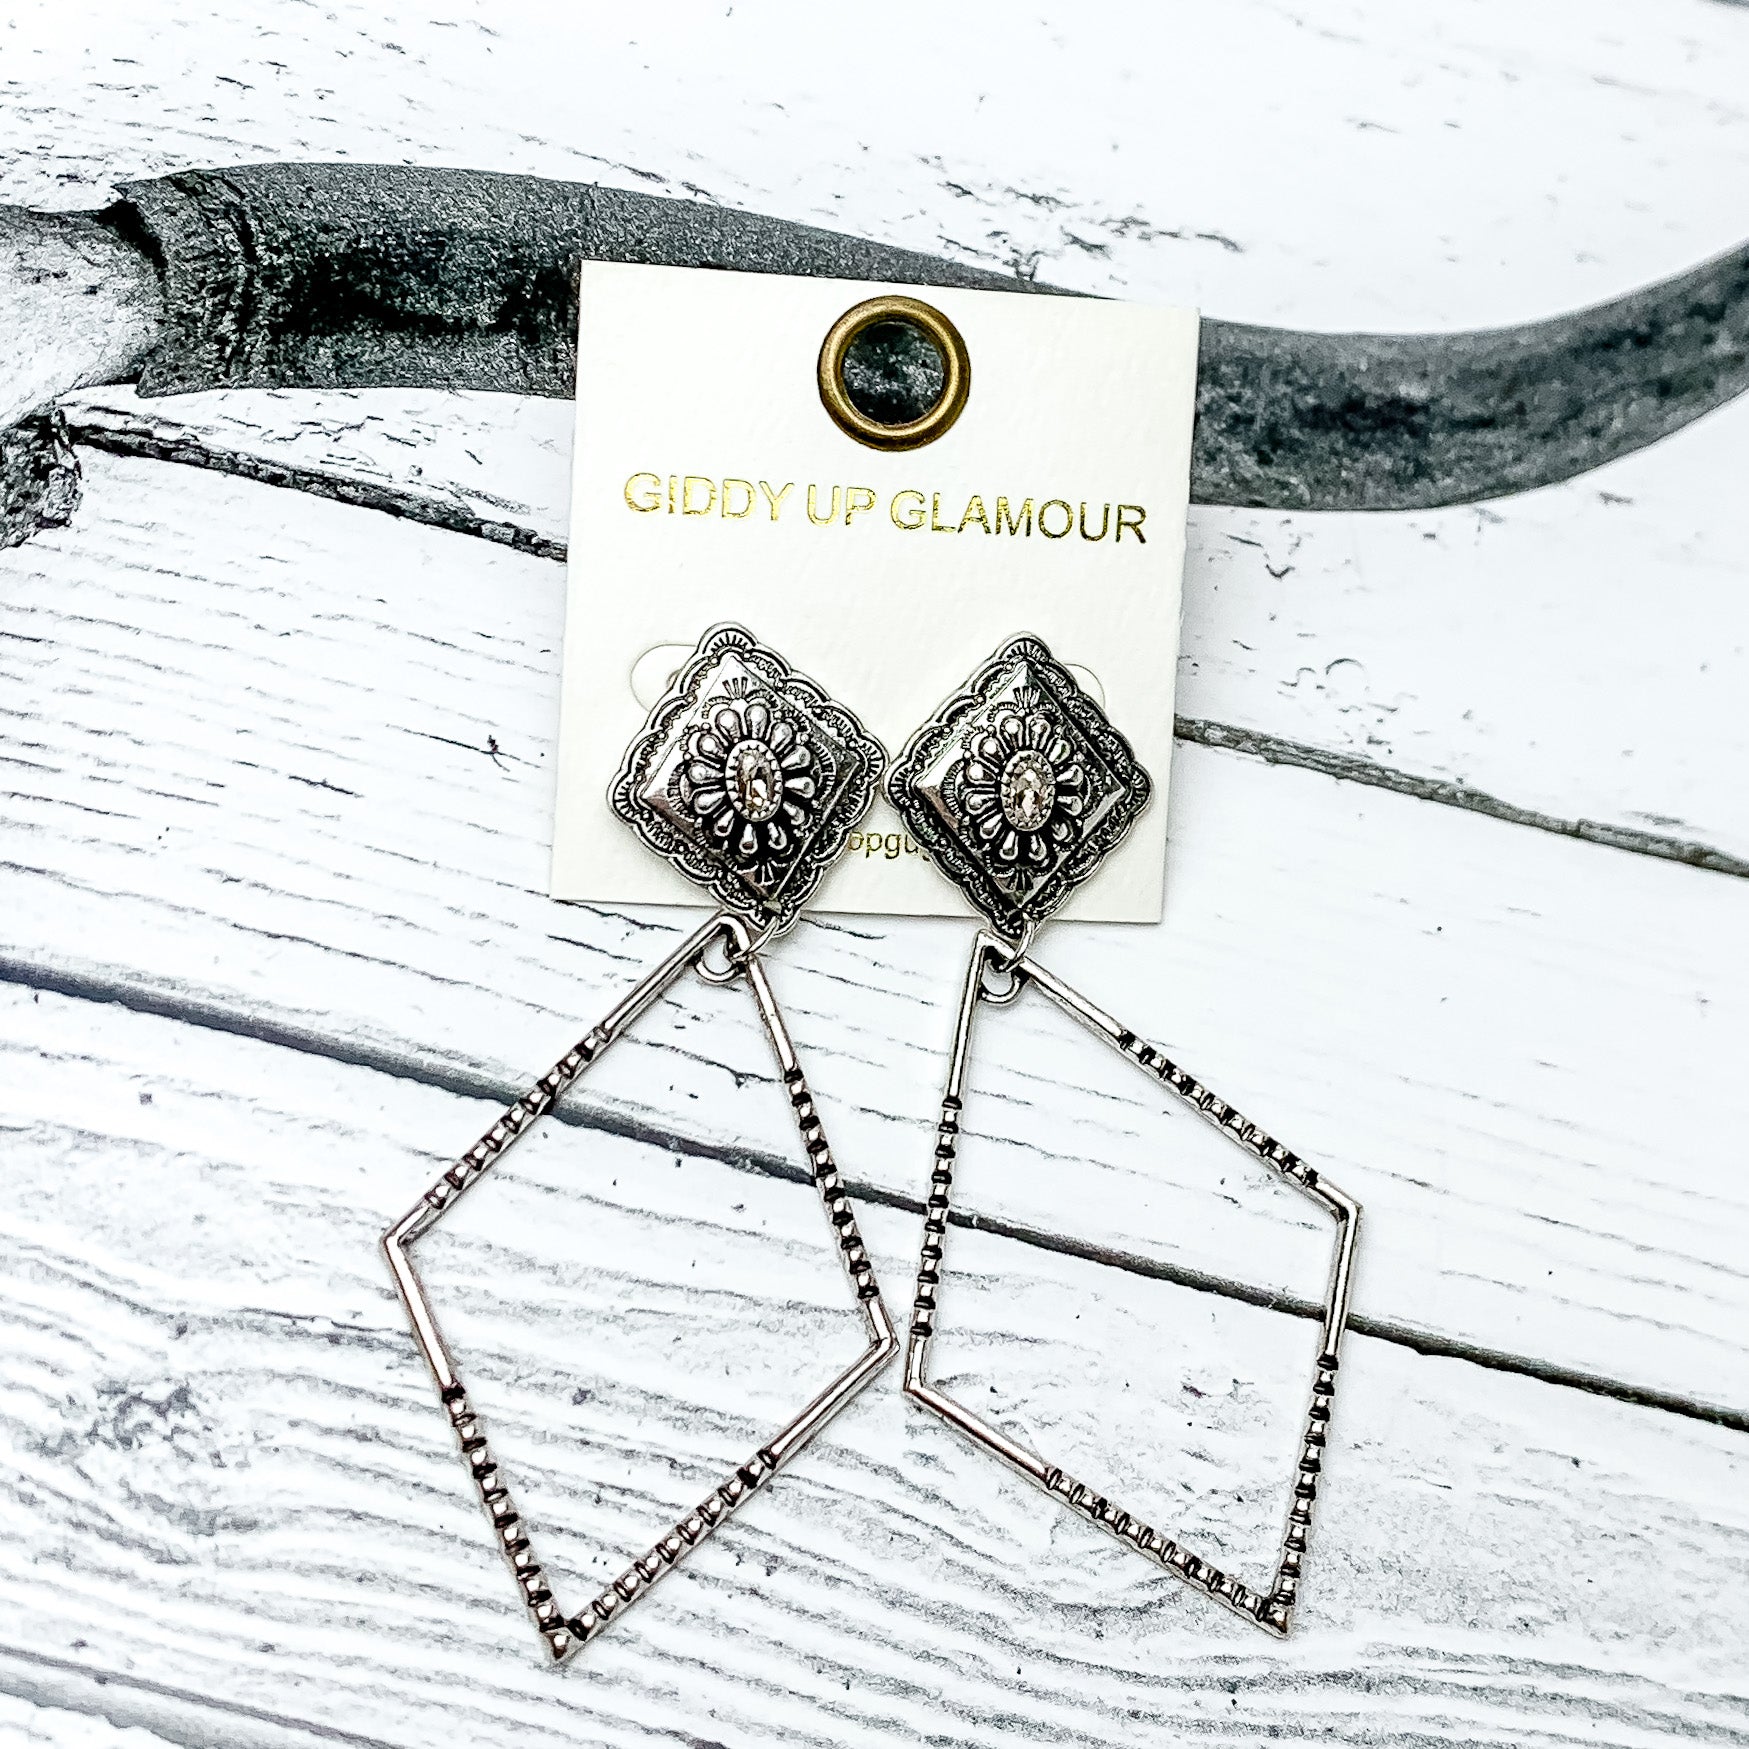 Point of Pretty Diamond Concho Post Earrings with Clear Crystals and Diamond Drop in Silver Tone. Pictured on a western background with a wood texture.